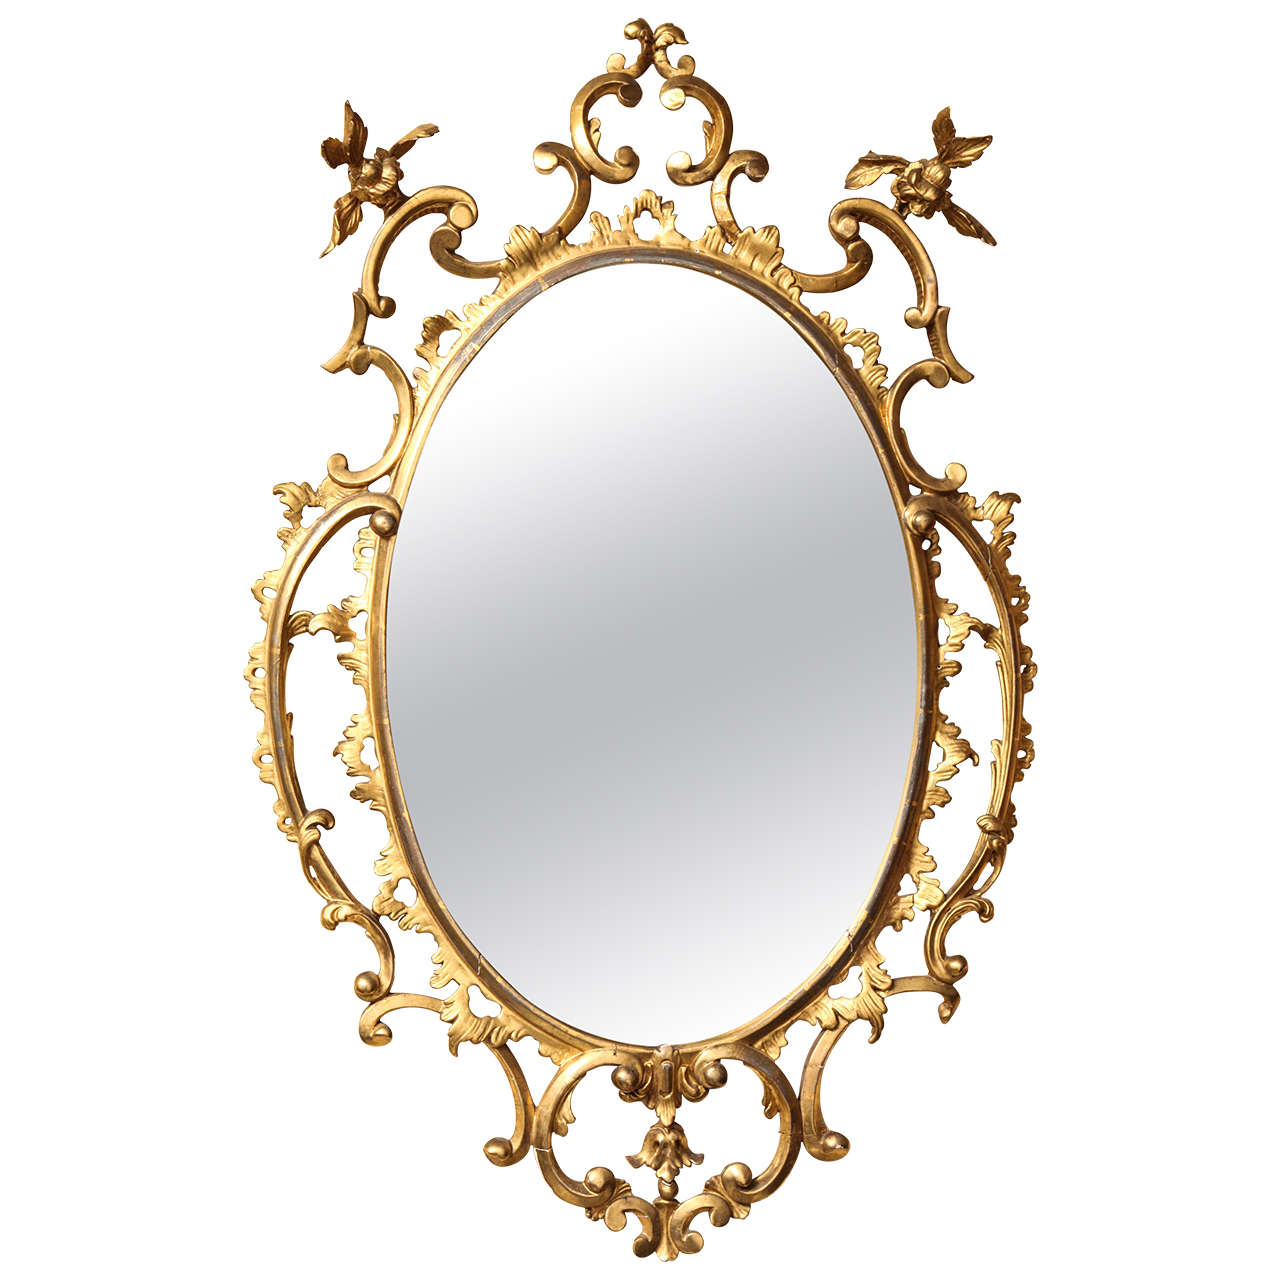 19th Century Finely Carved and Gilded English Mirror in the 18th Century Taste